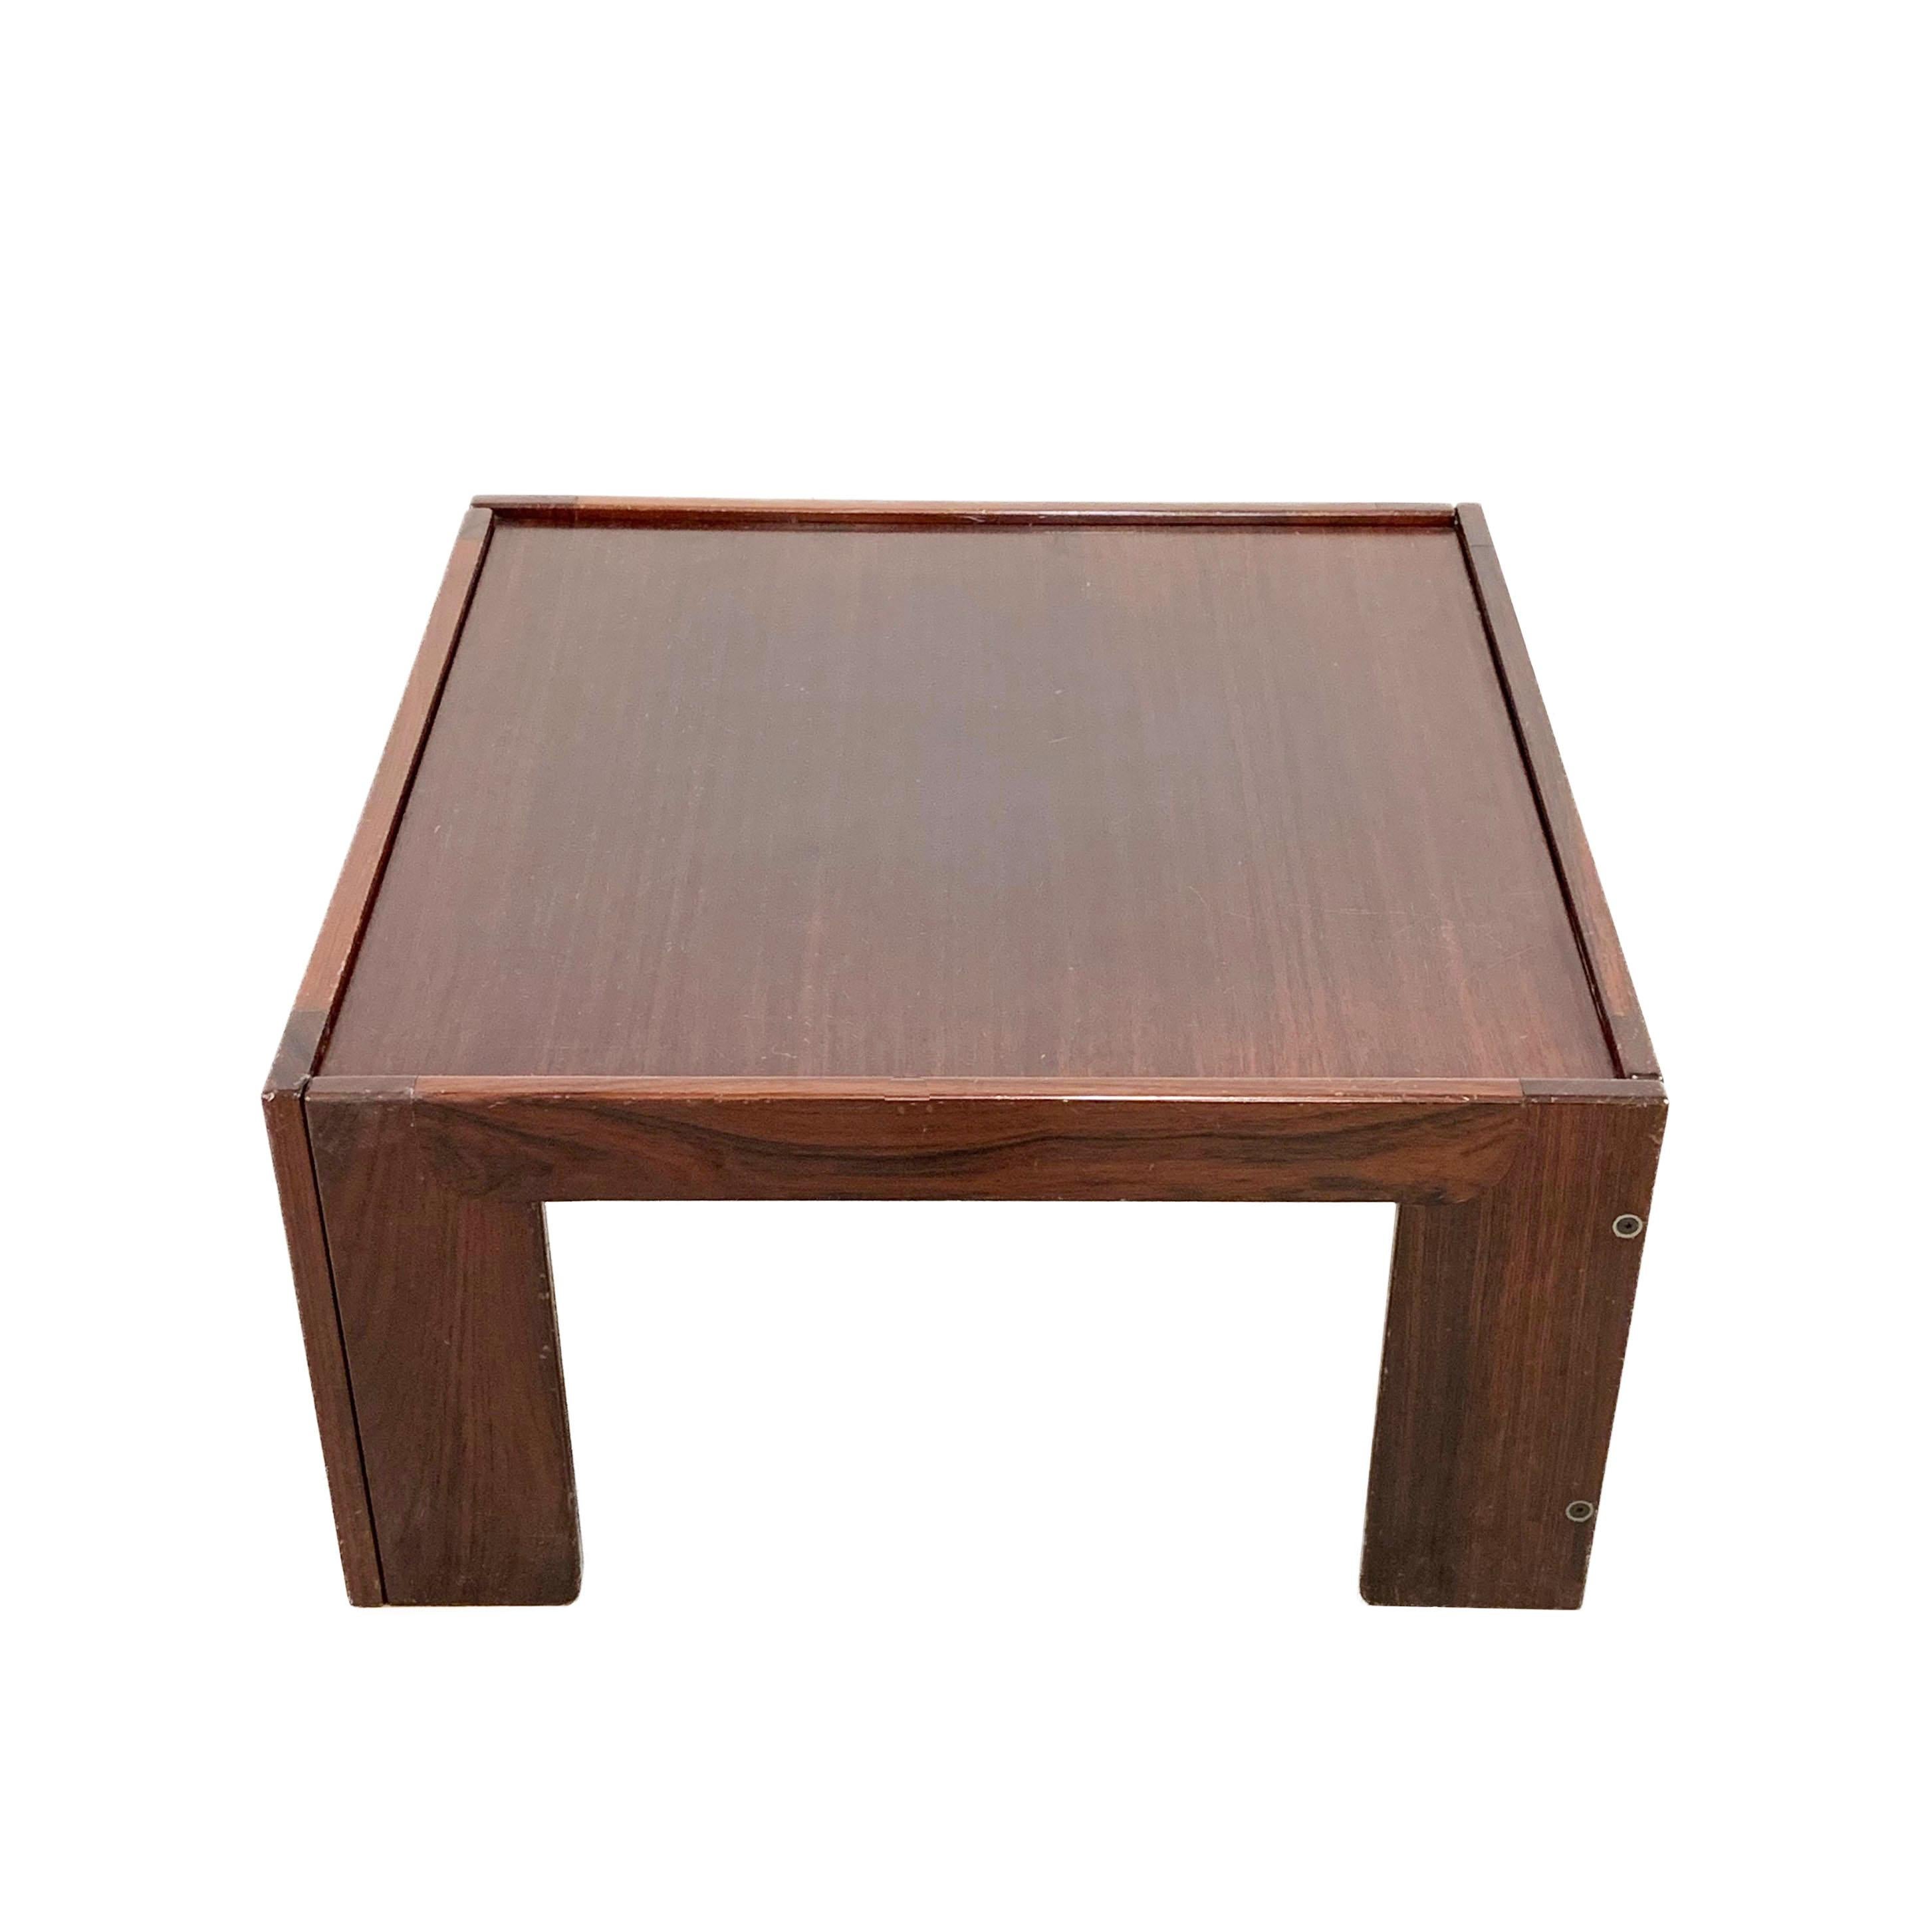 Mid-Century Modern Midcentury Afra and Tobia Scarpa Wood Italian Squared Table for Cassina 1965 For Sale